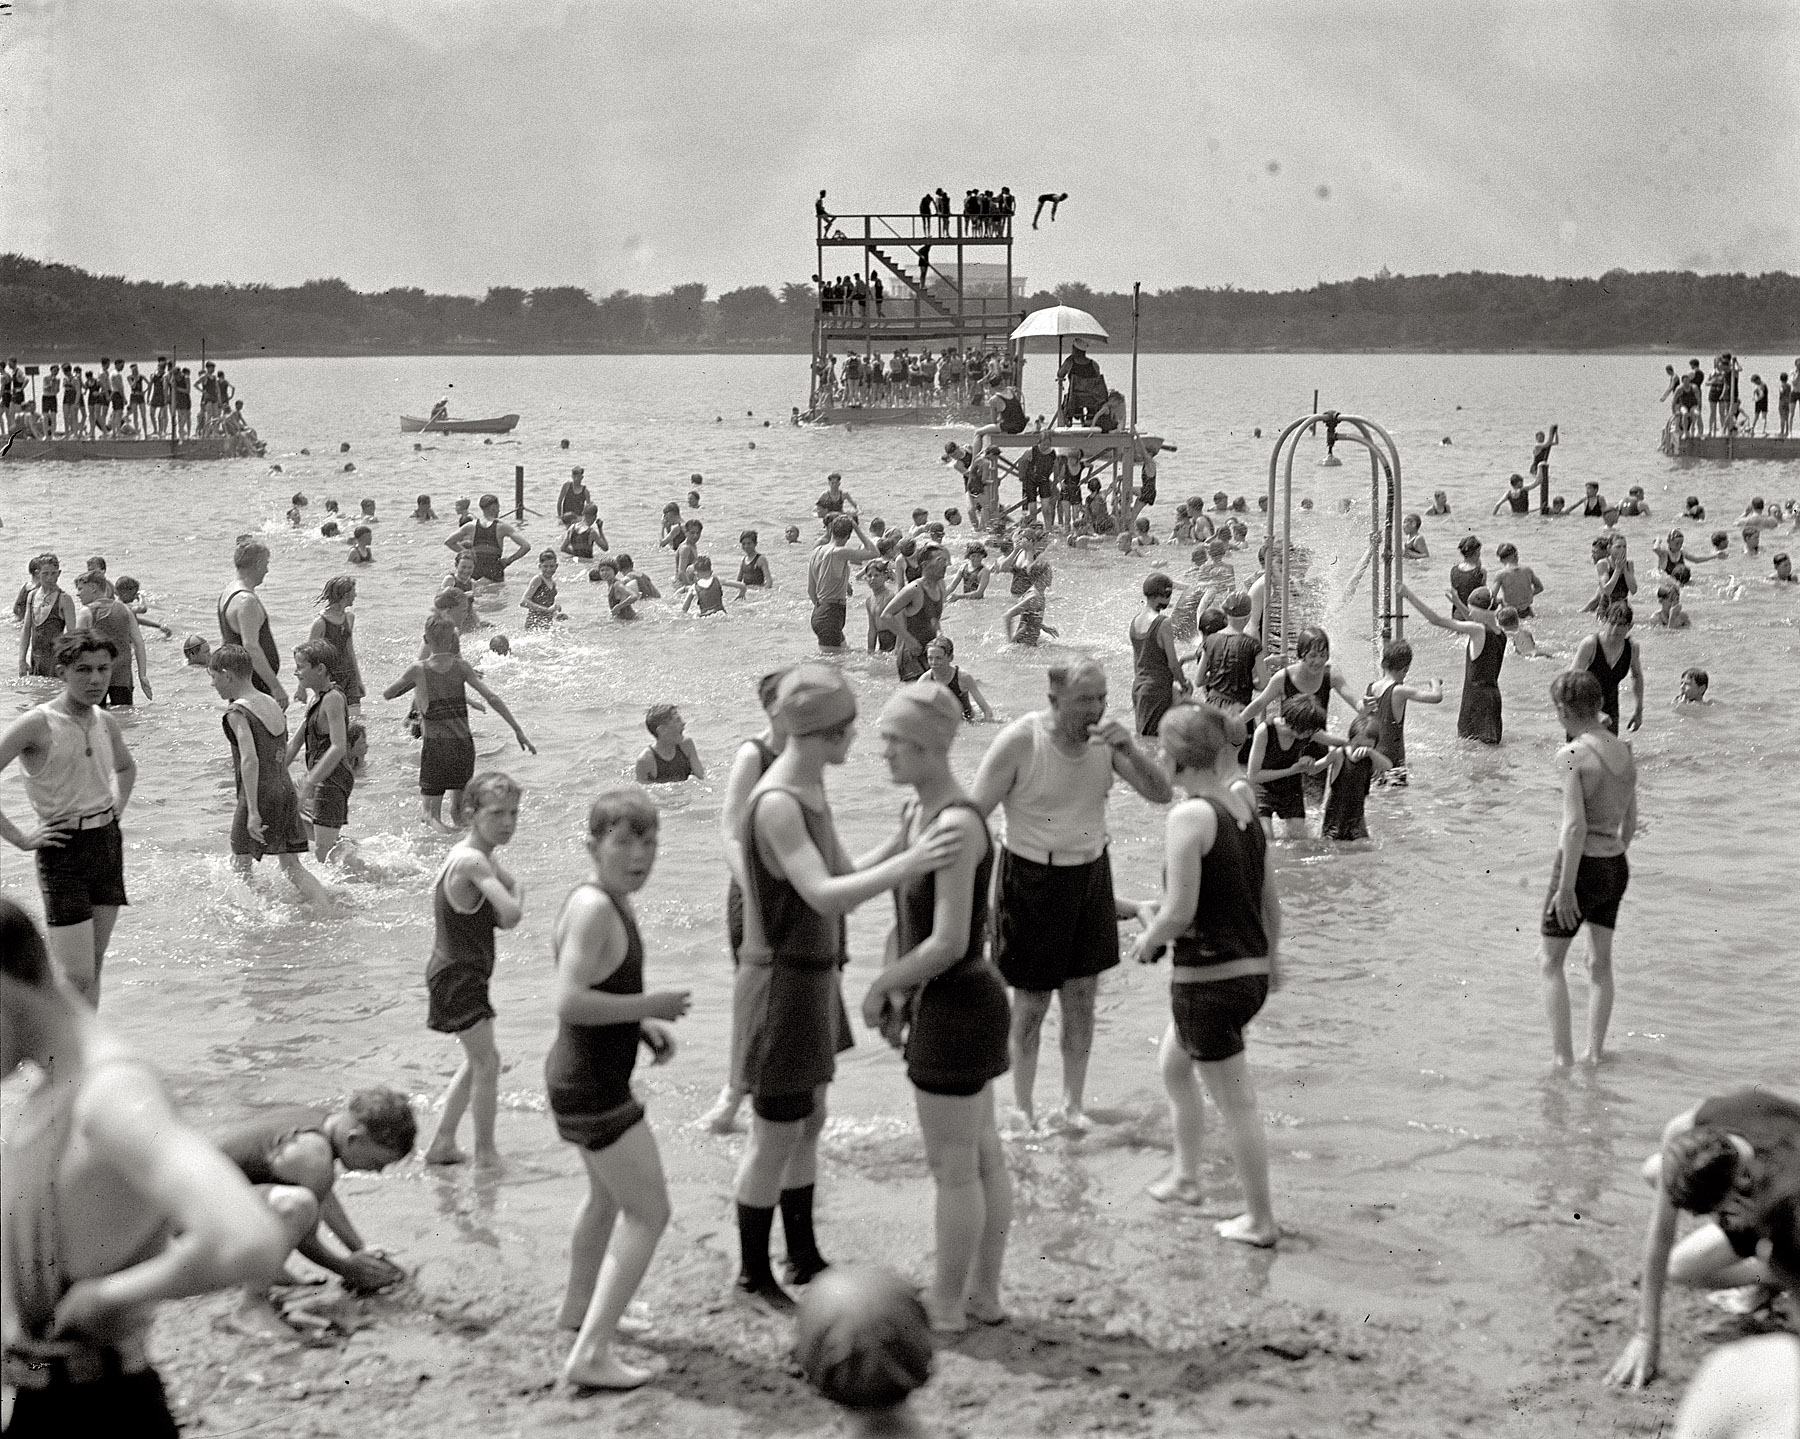 "Potomac bathing beach. June 19, 1924." In case anyone needed reminding: No horseplay will be tolerated. National Photo Co. glass negative. View full size.